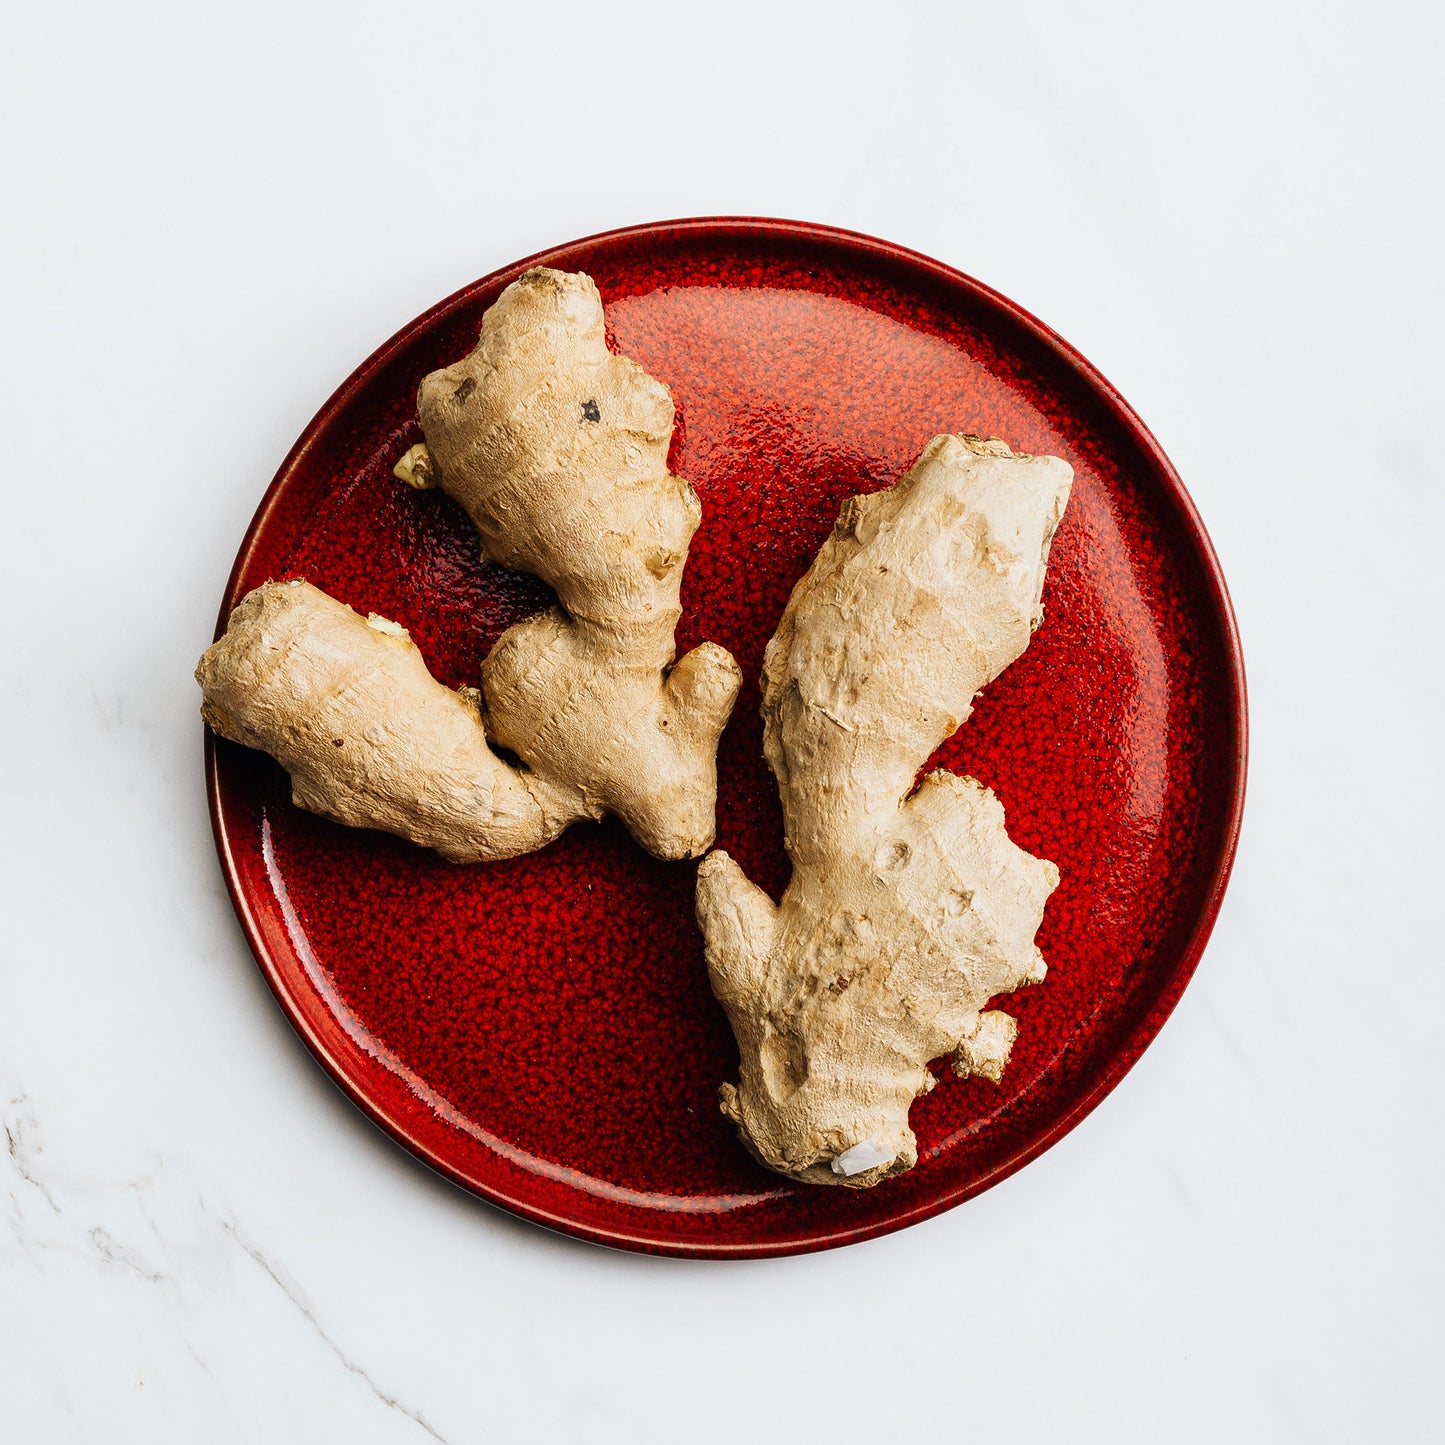 The Benefits of Drinking Ginger in Your Natural Tea Blends